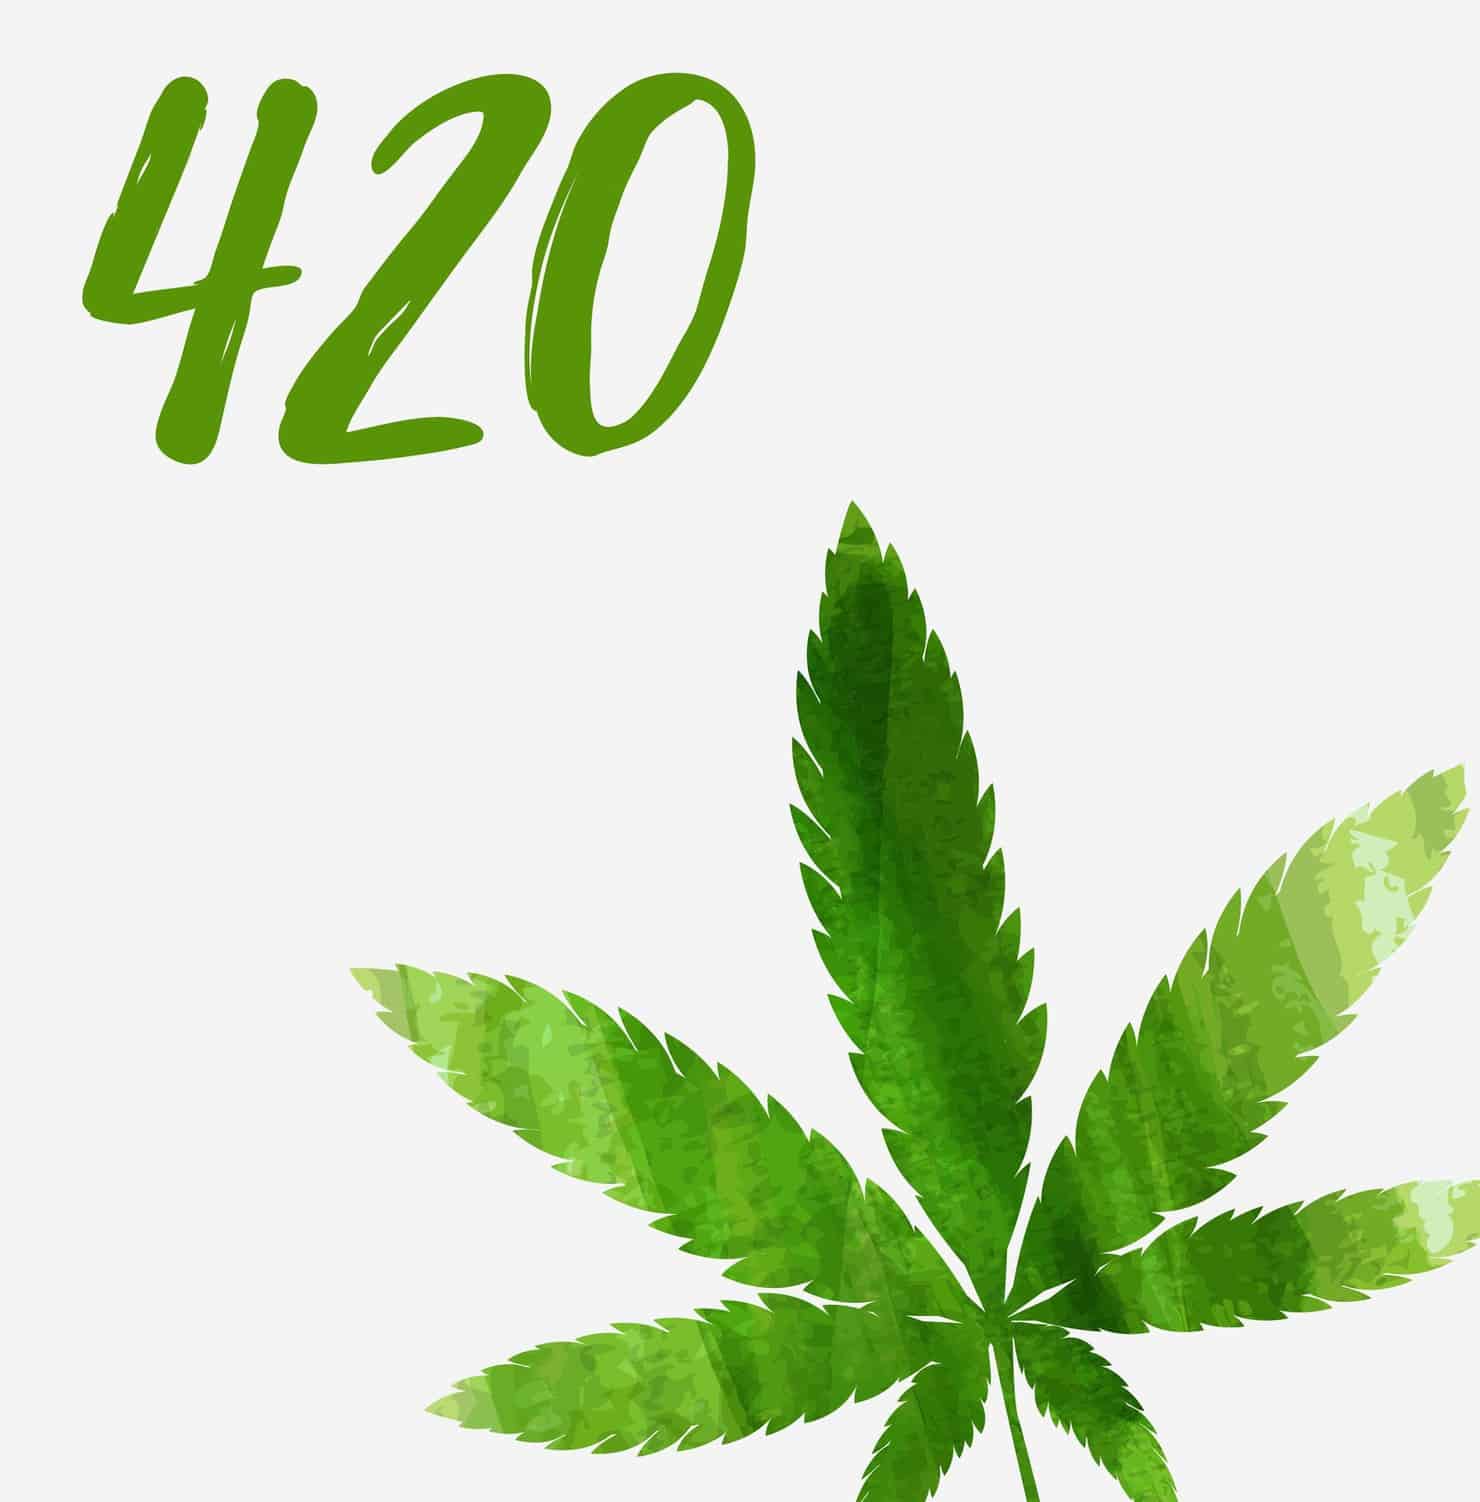 National 4/20 Day: How It Began